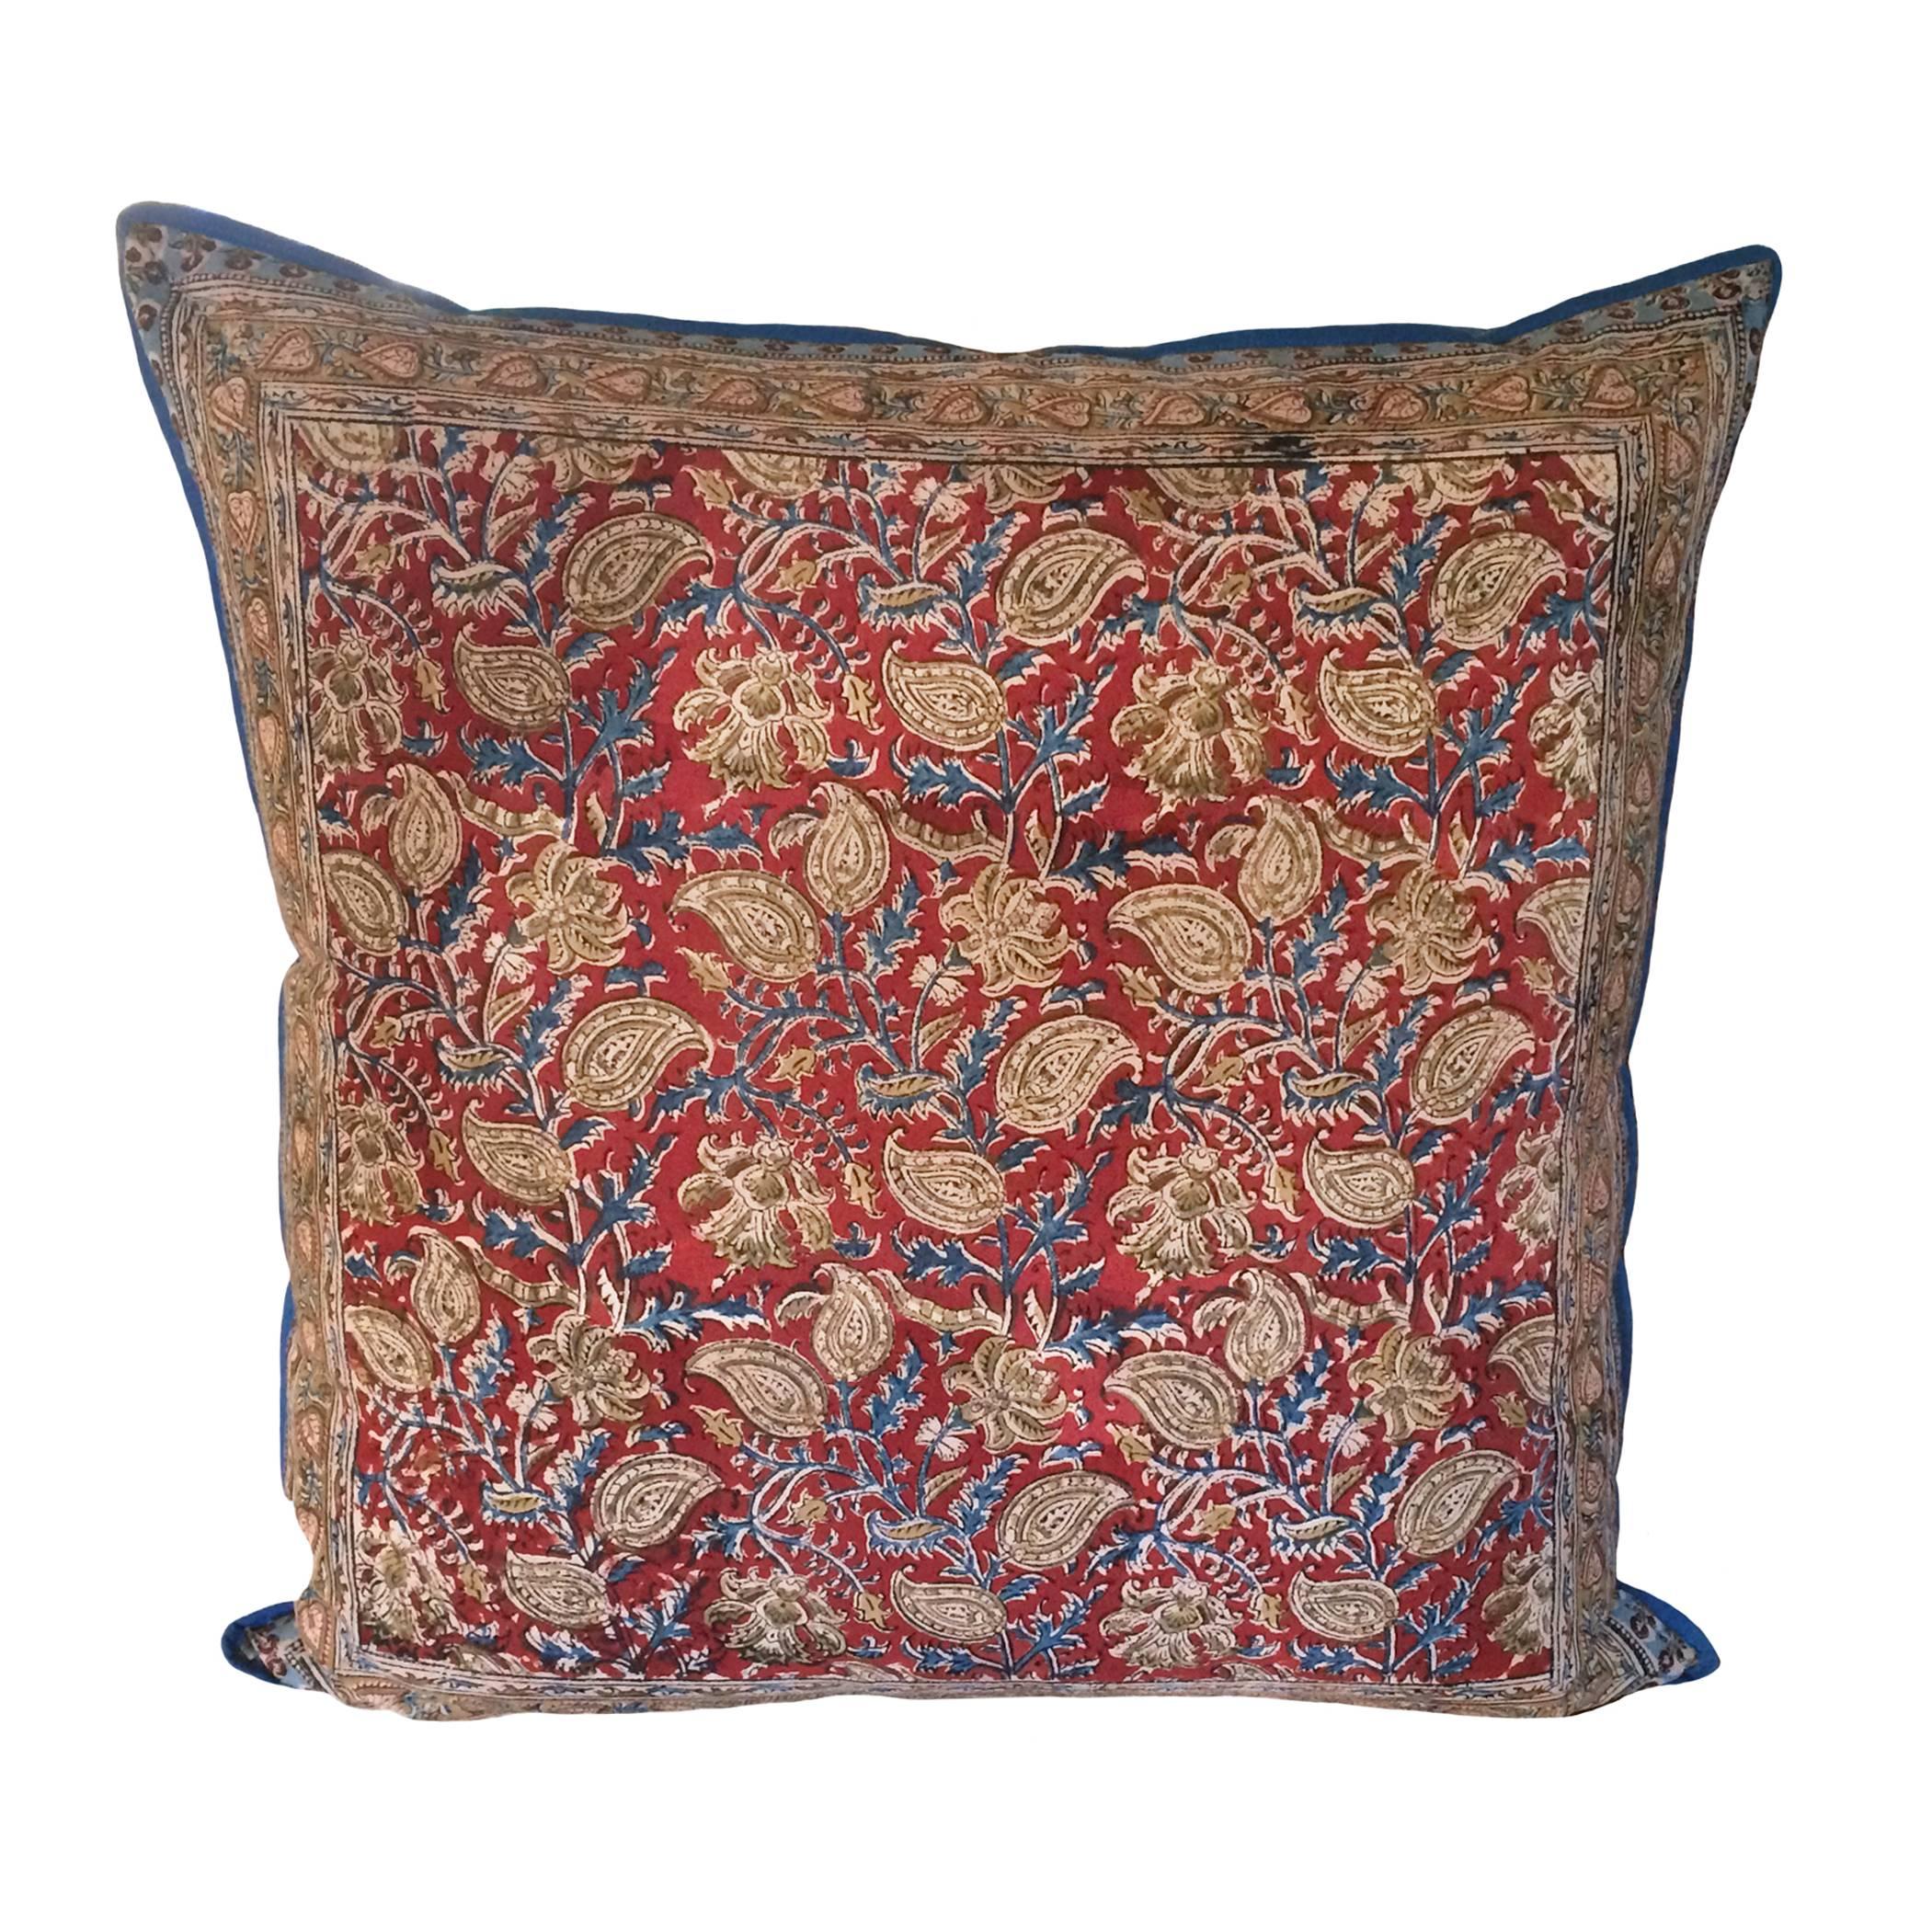 Pair of Indian batik pillows; burgundy, beige, blue paisley with borders; Mid-Century. Differing patterns on each side.